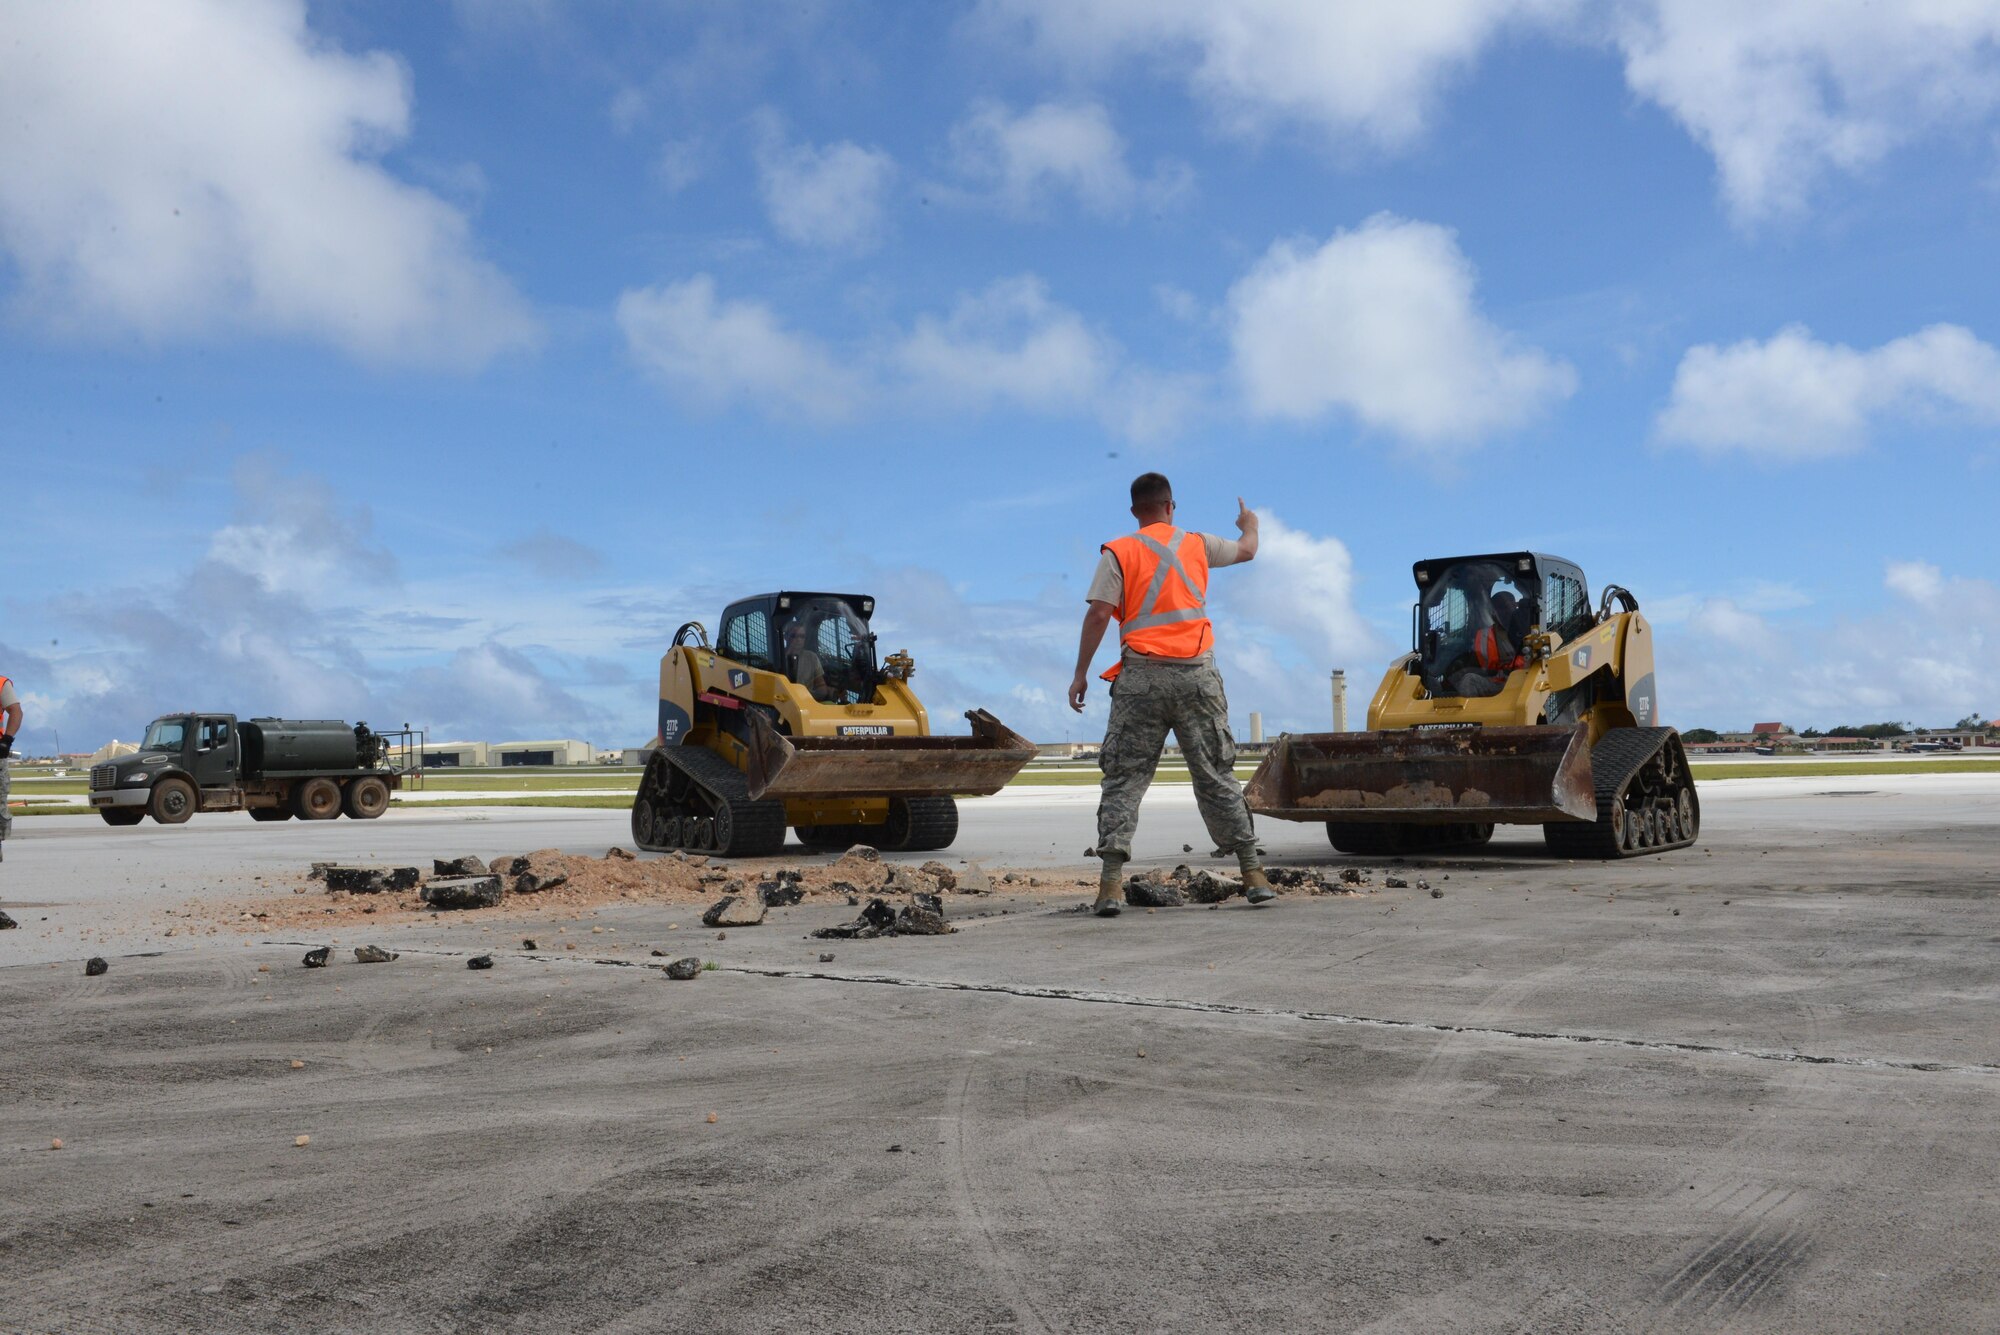 Staff Sgt. Austin Winegardner directs Airmen operating heavy machinery to clear debris away from a simulated damaged area created during airfield damage repair training Jan. 23, 2014, at Andersen Air Force Base, Guam. The 36th Civil Engineer Squadron was one of the first units in the Air Force to receive training on a new airfield damage repair capability. Winegardner is a project leader with the 36th Civil Engineer Squadron. (U.S. Air Force photo/Airman 1st Class Emily A. Bradley) 
